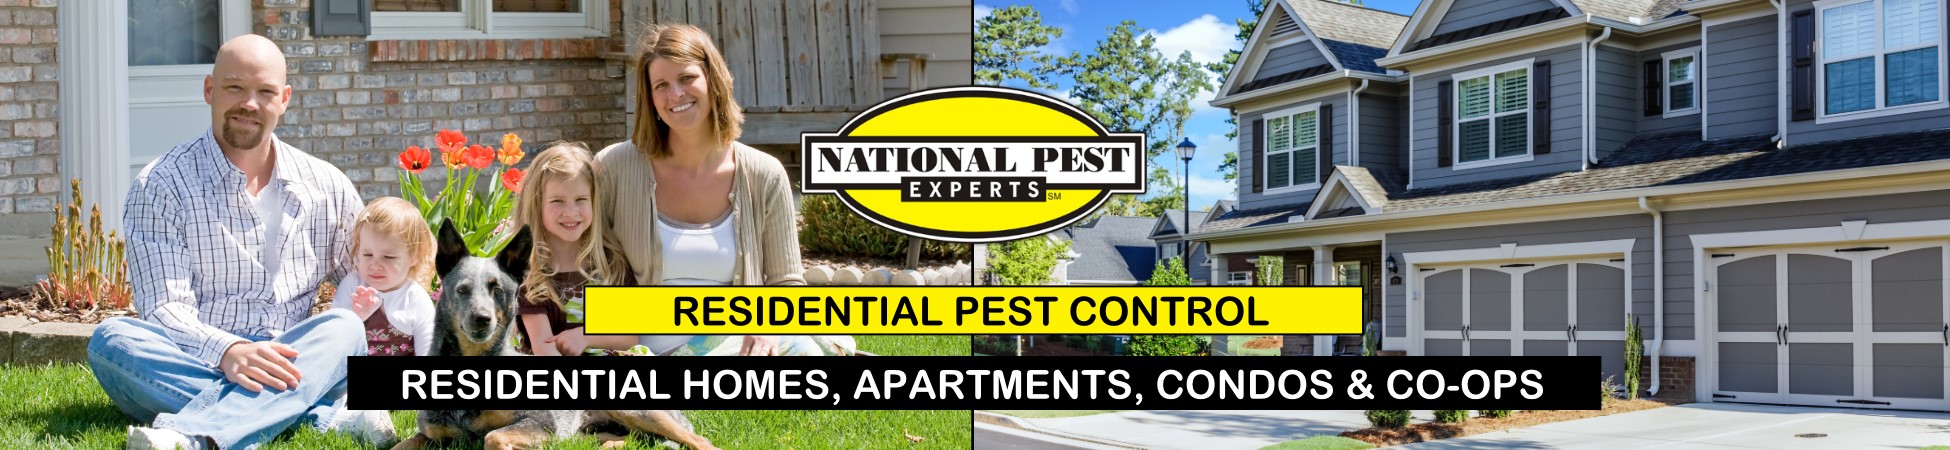 National Pest Experts - Residential exterminating and pest control in North Bellmore, NY